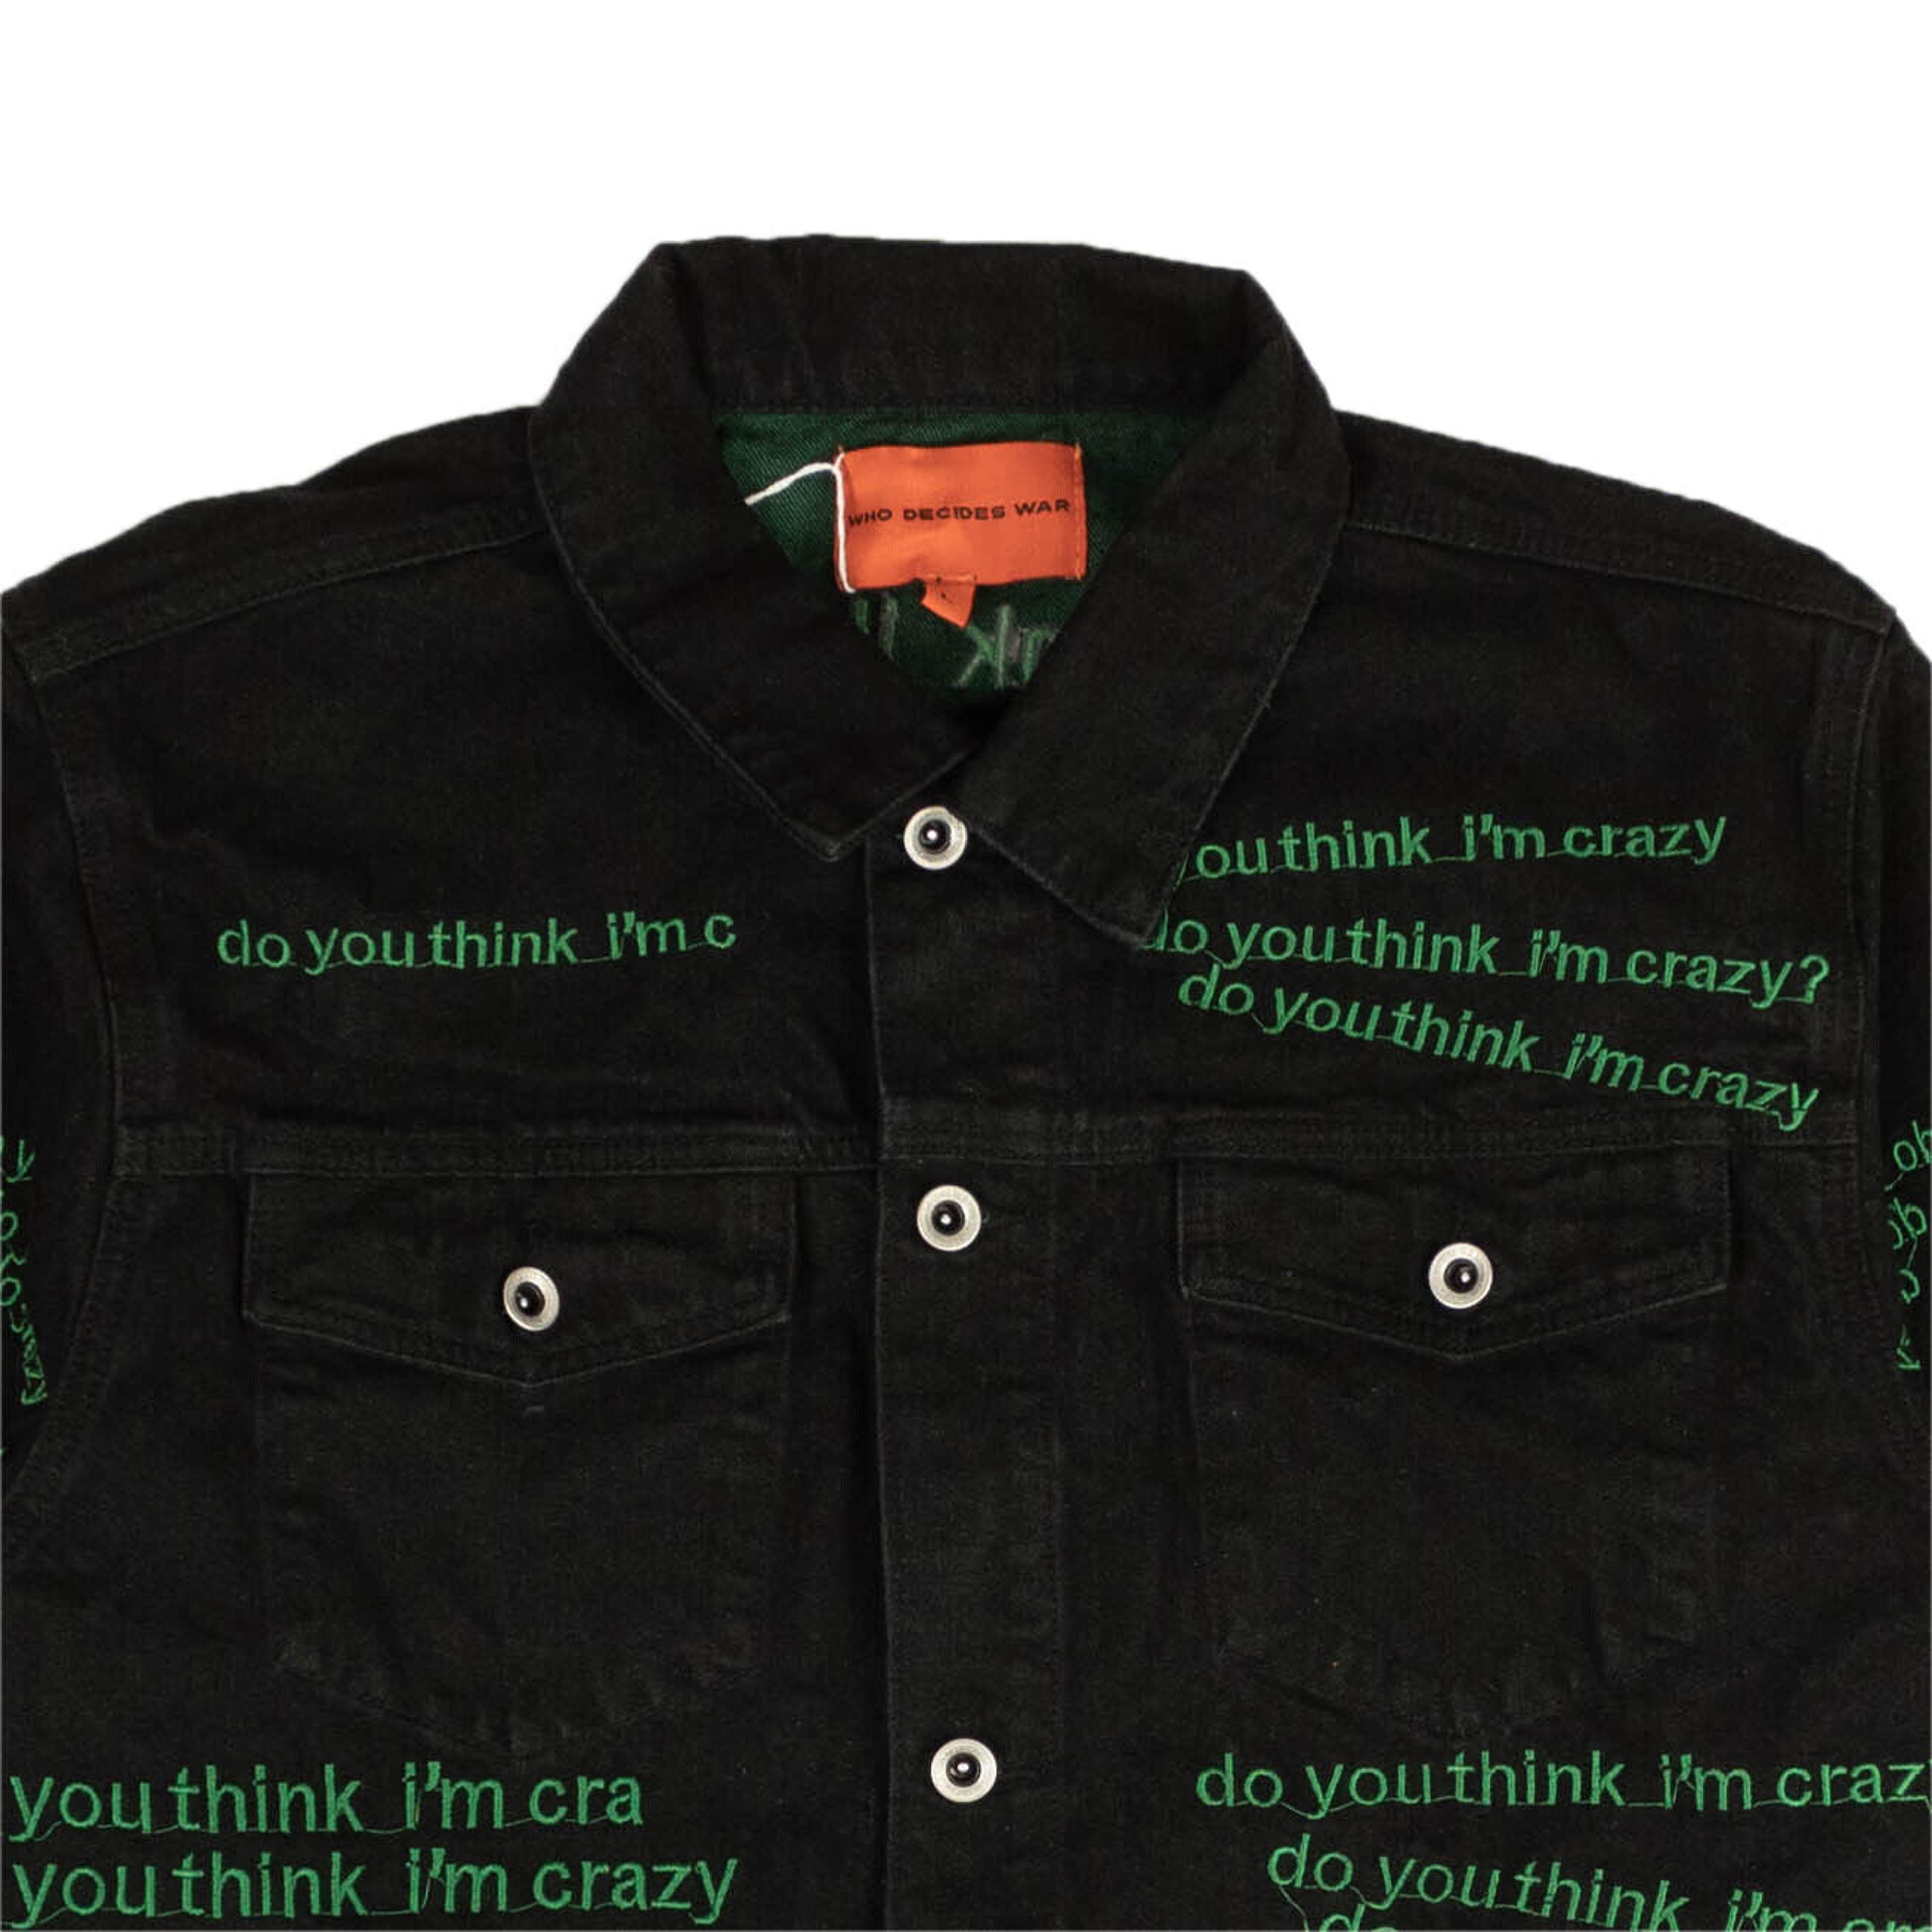 Alternate View 5 of Who Decides War Do You Think I'M Crazy Trucker - Black/Green